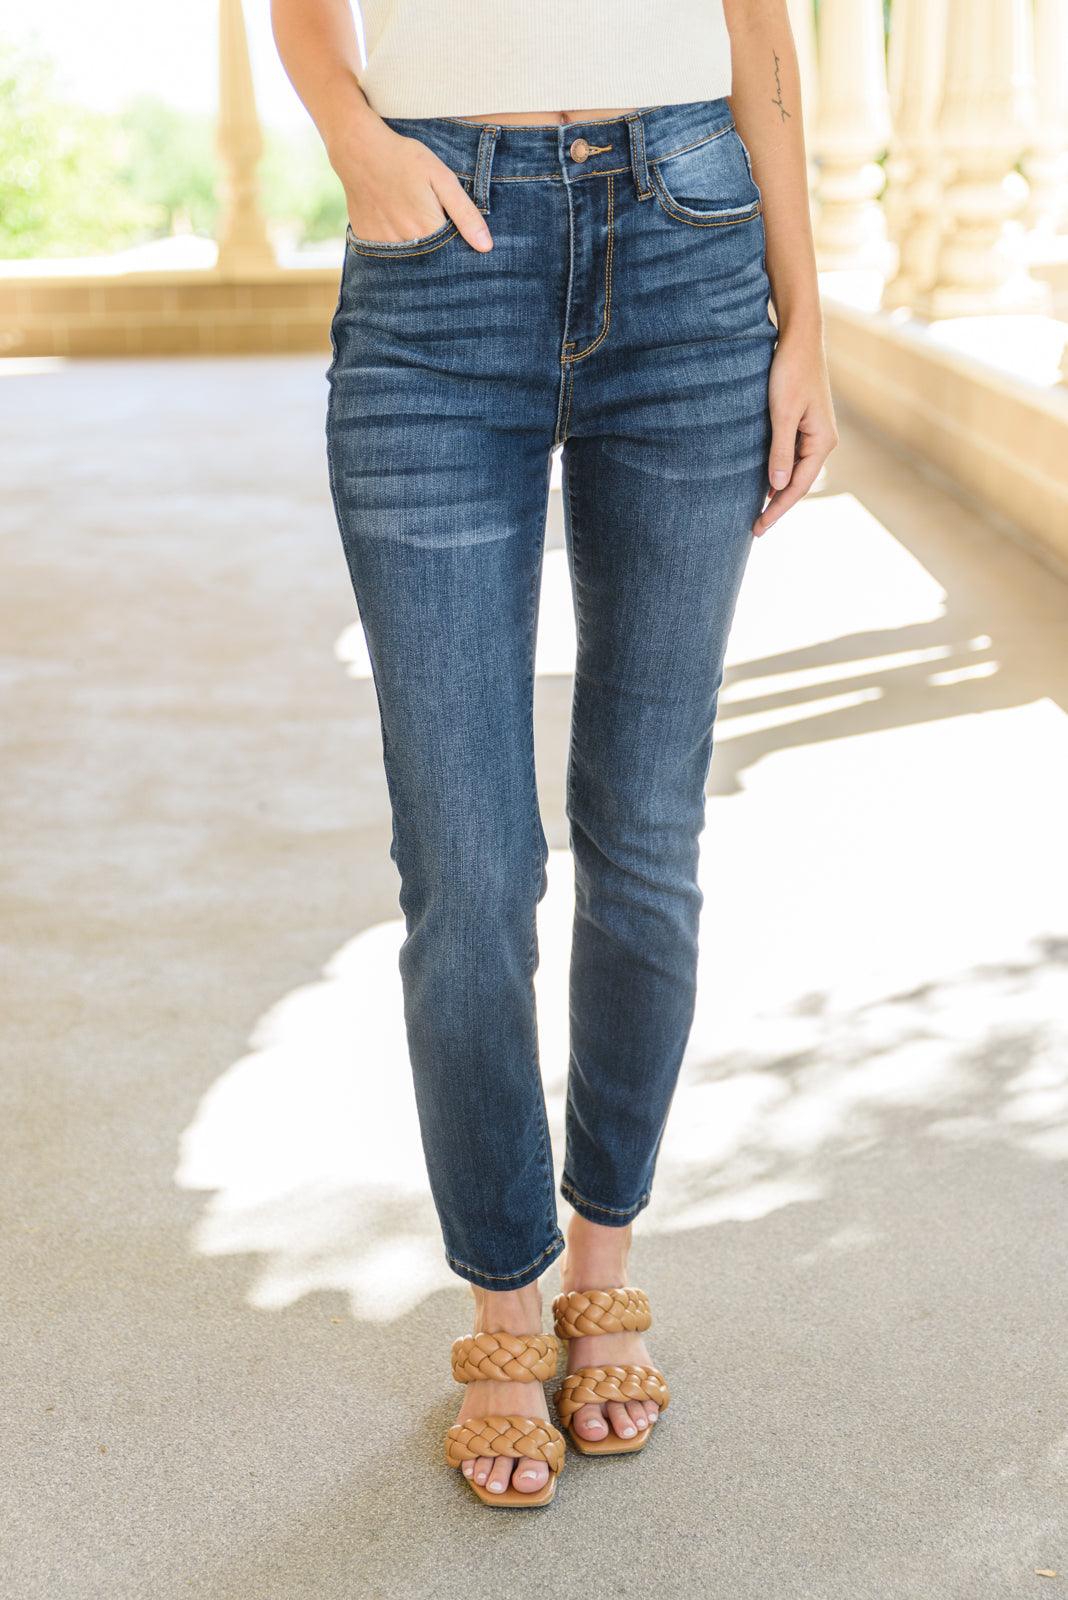 Reba Hi-Rise Clean Relaxed Fit Jeans - The Fiery Jasmine